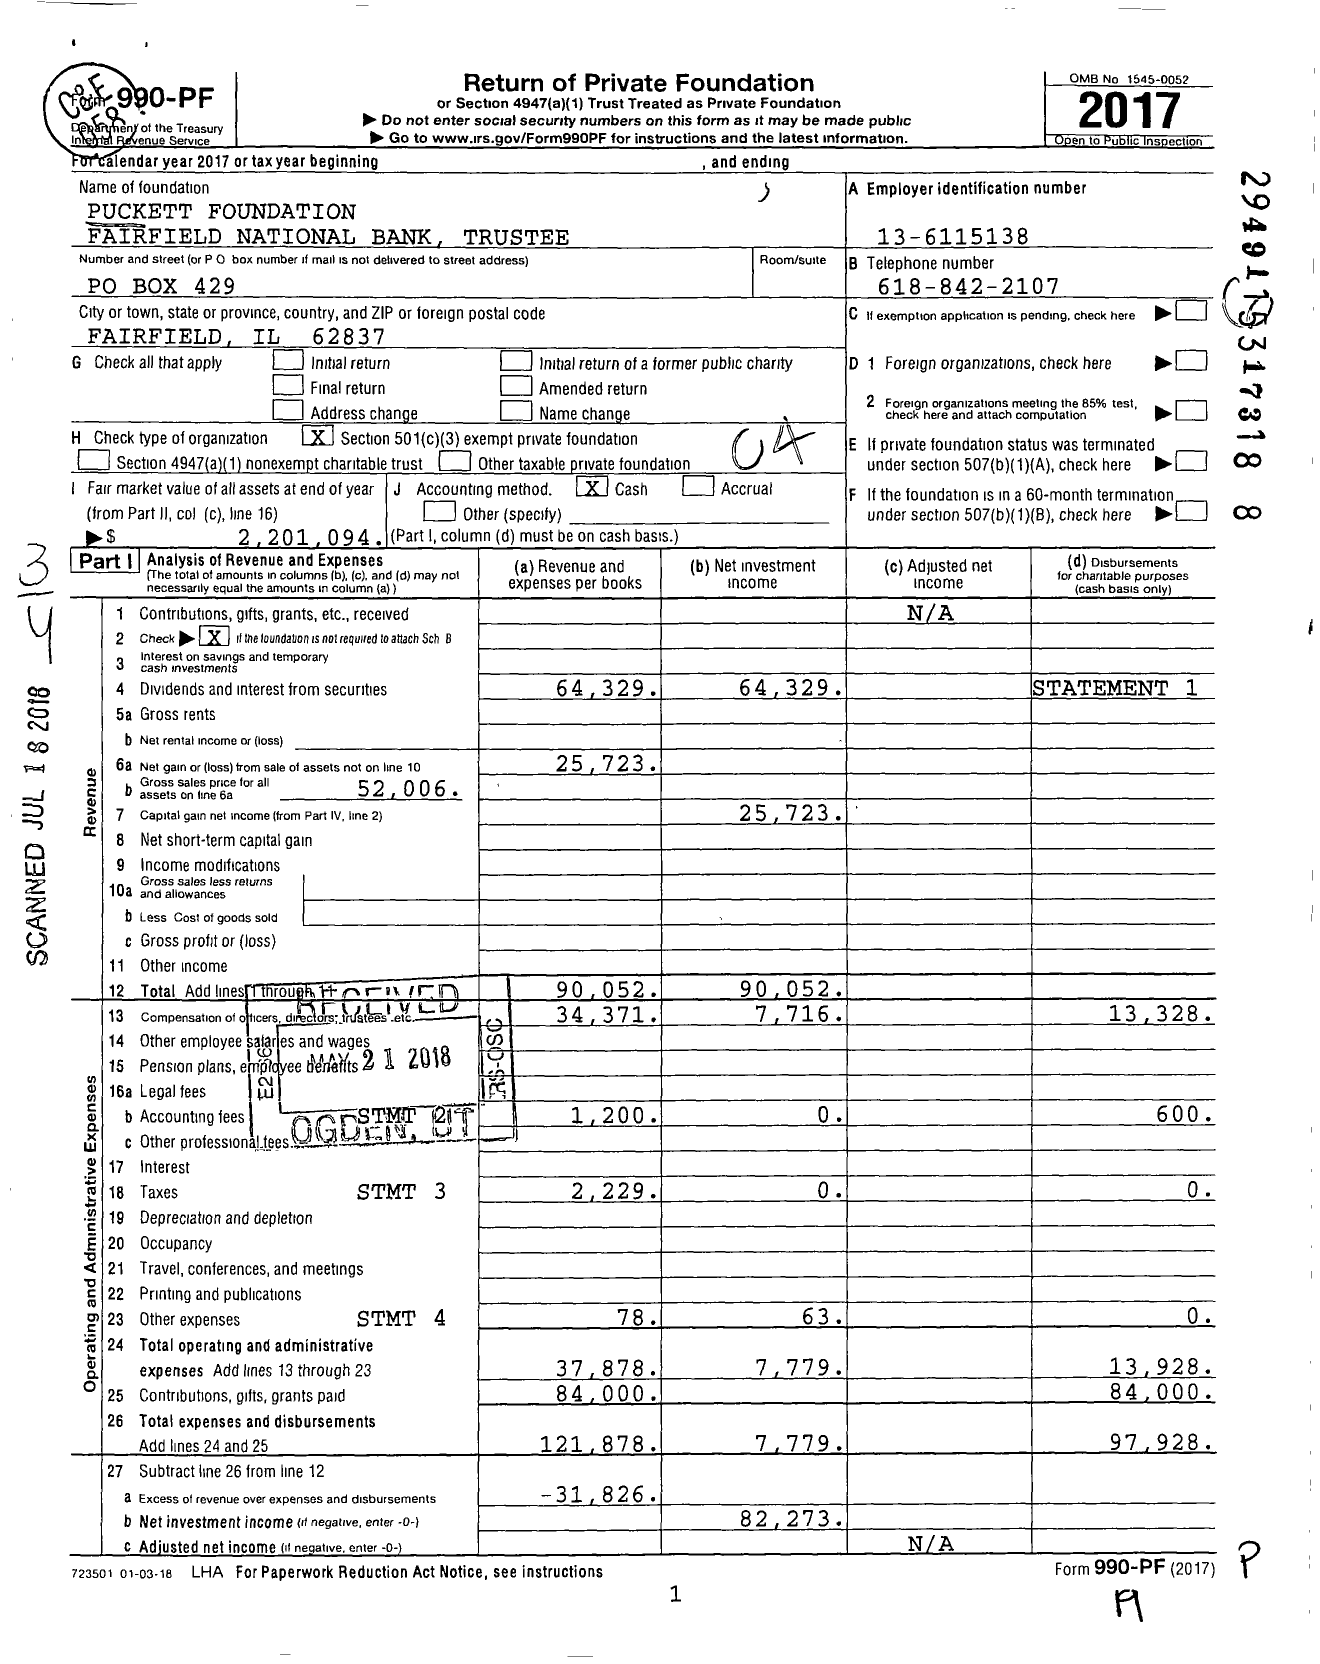 Image of first page of 2017 Form 990PF for Puckett Foundation Fairfield National Bank Trustee